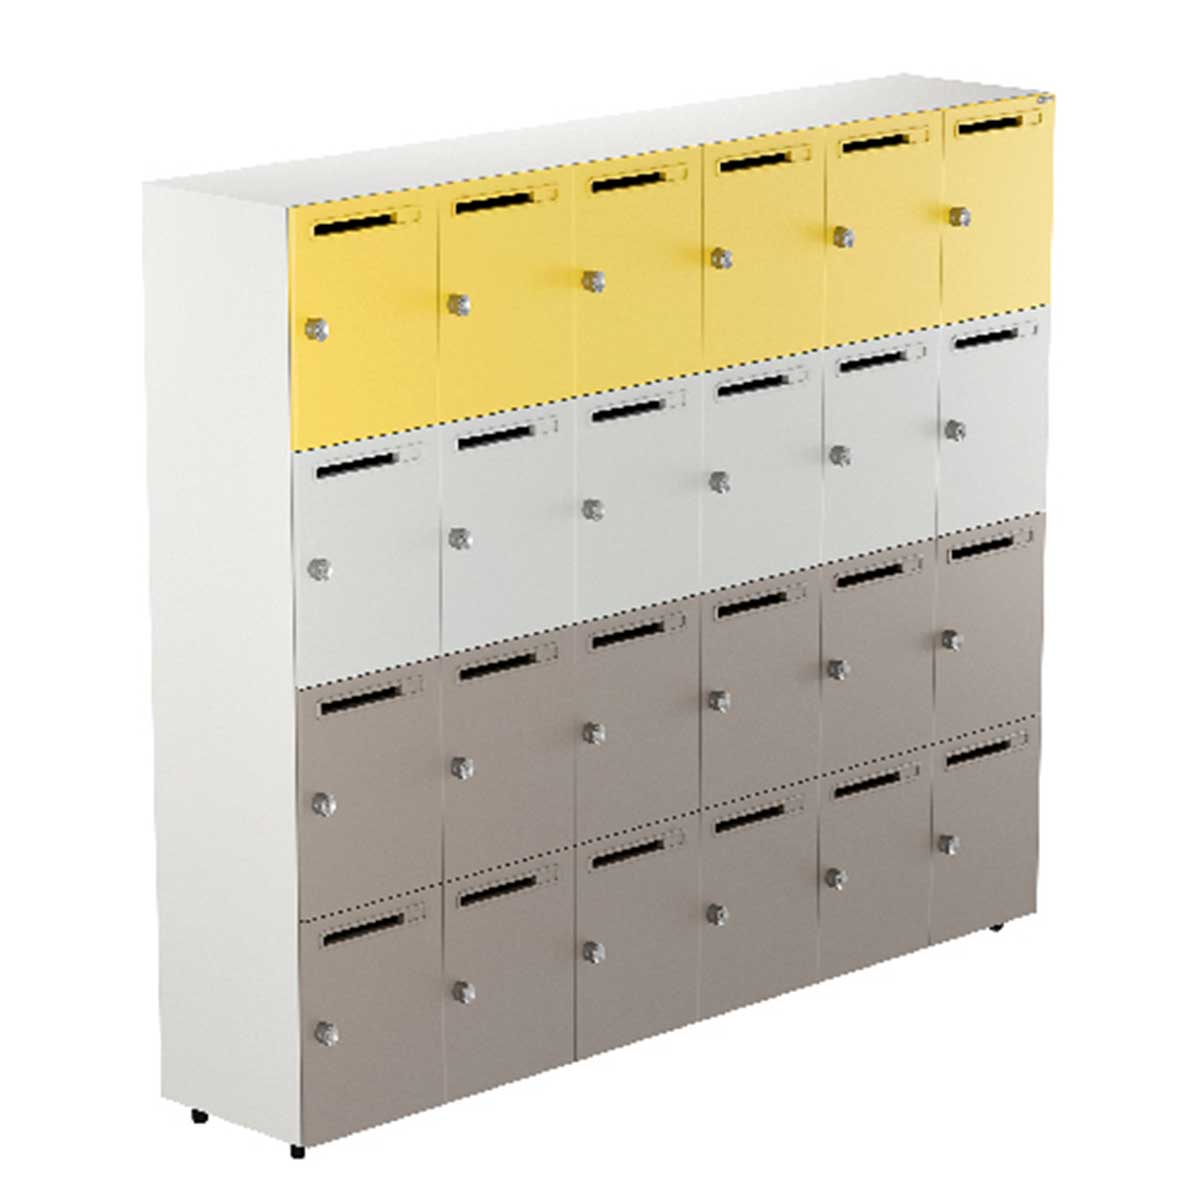 Storage Lockers Manufacturers, Suppliers in Faridabad Sector 16